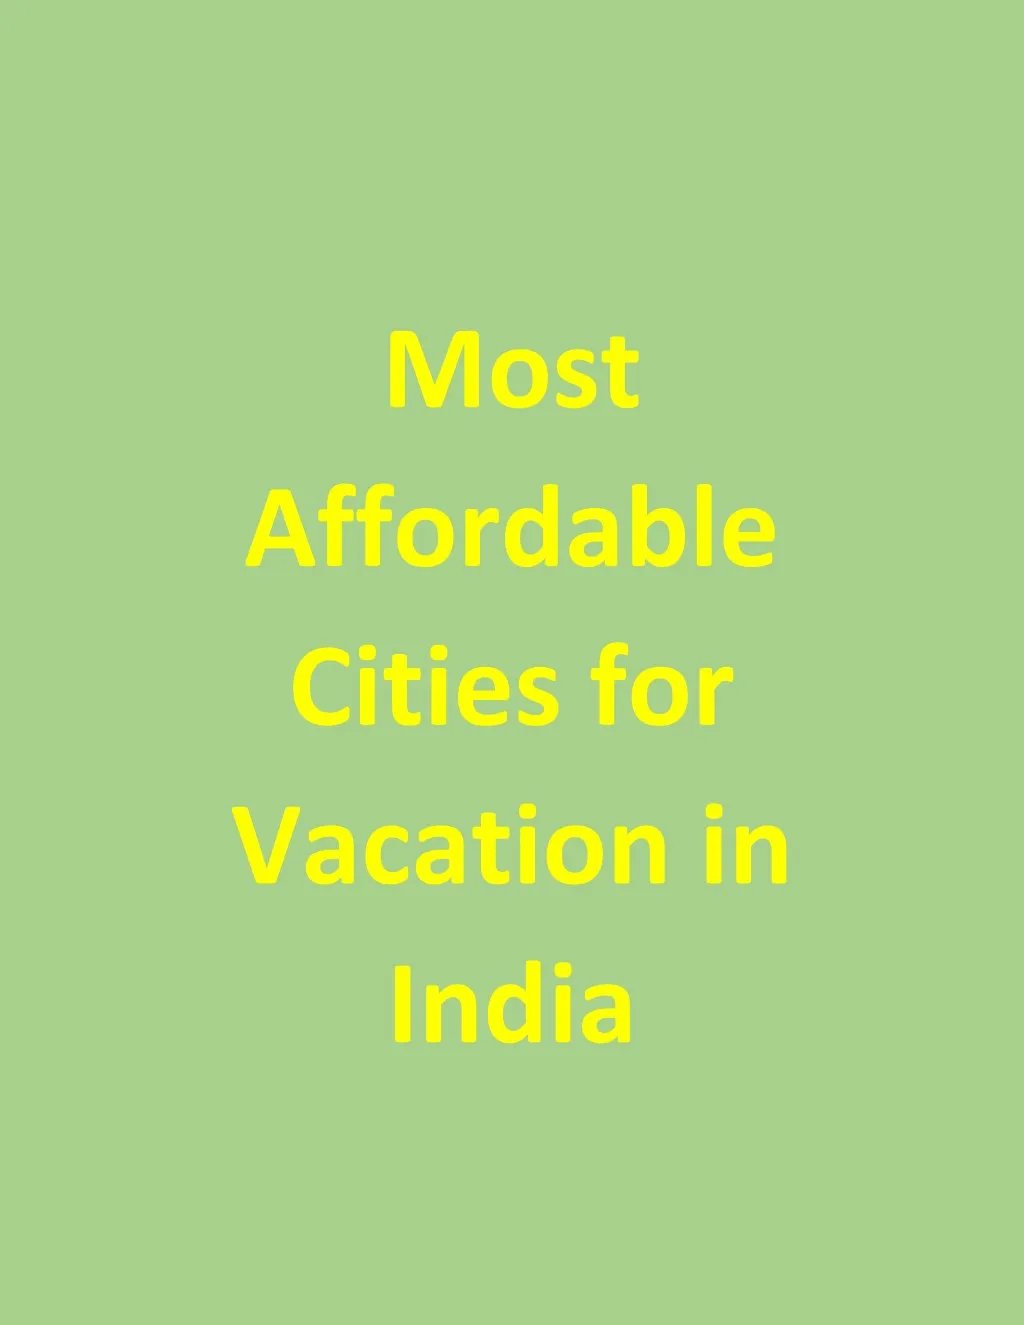 most affordable cities for vacation in india